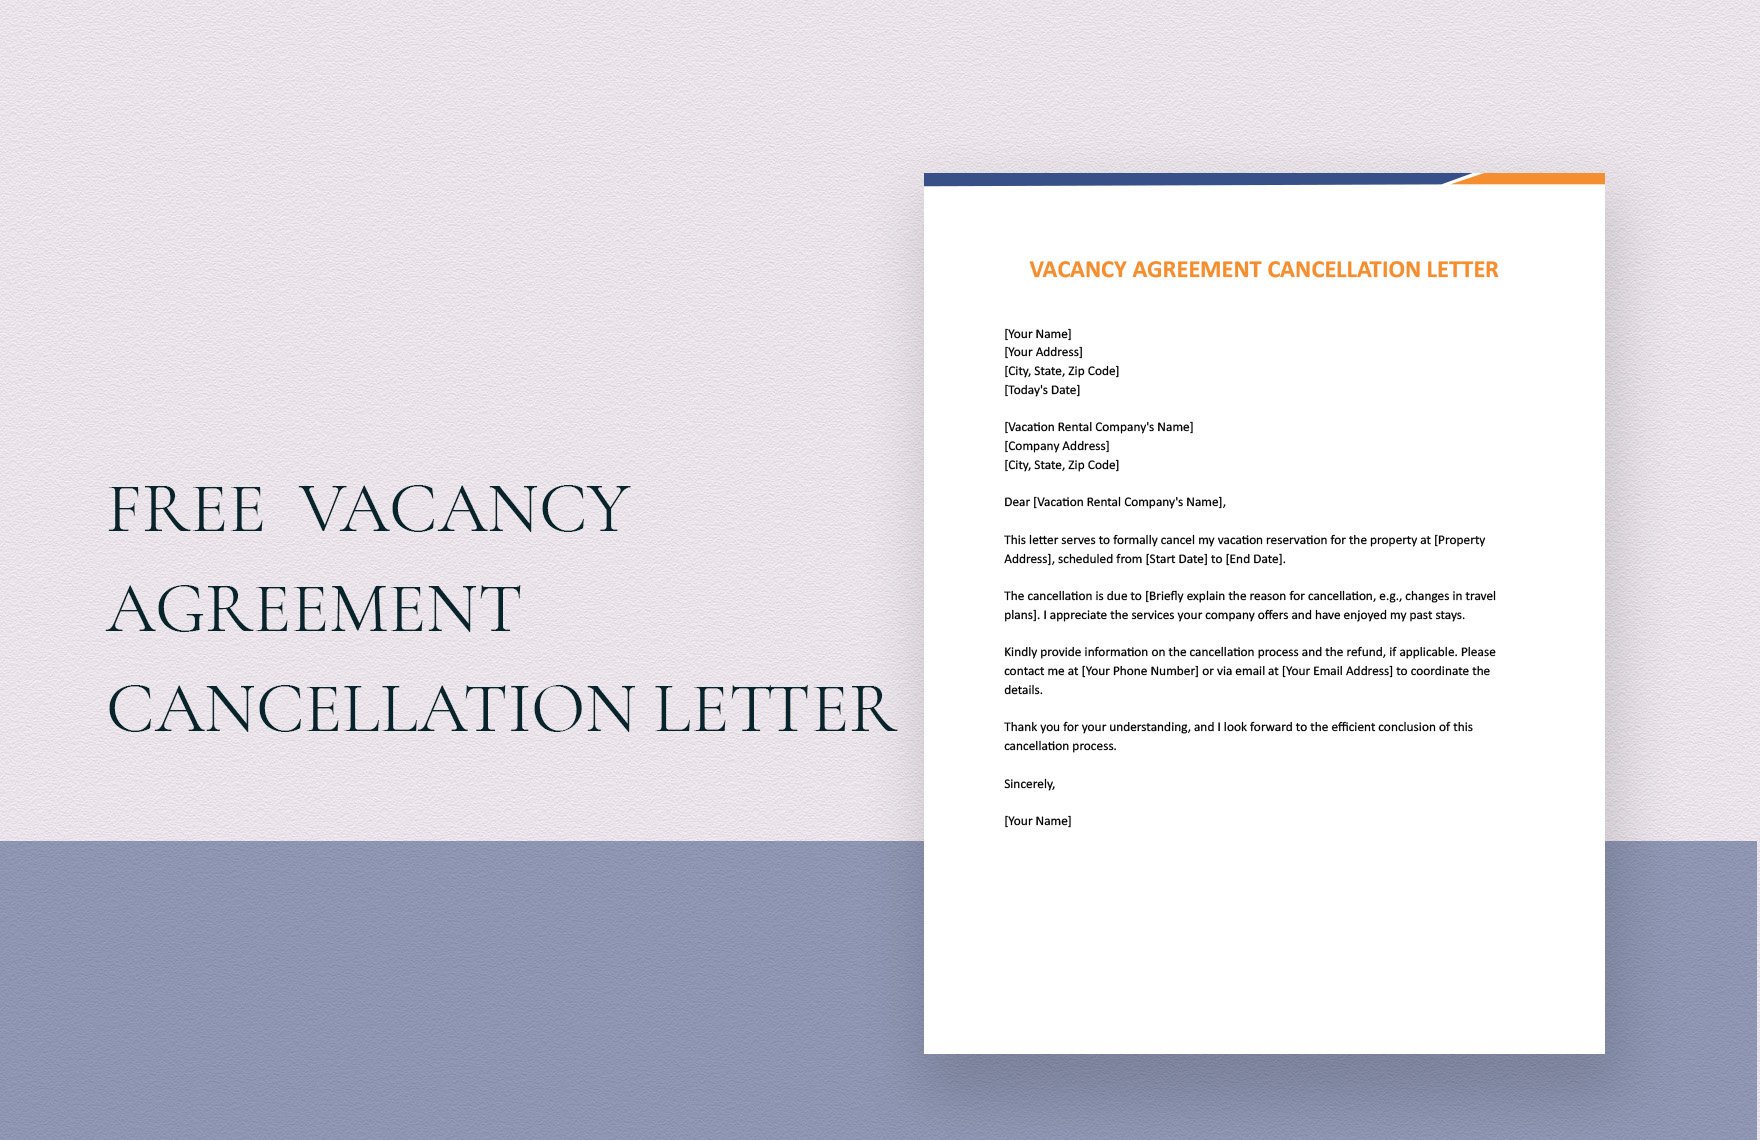 Vacancy Agreement Cancellation Letter